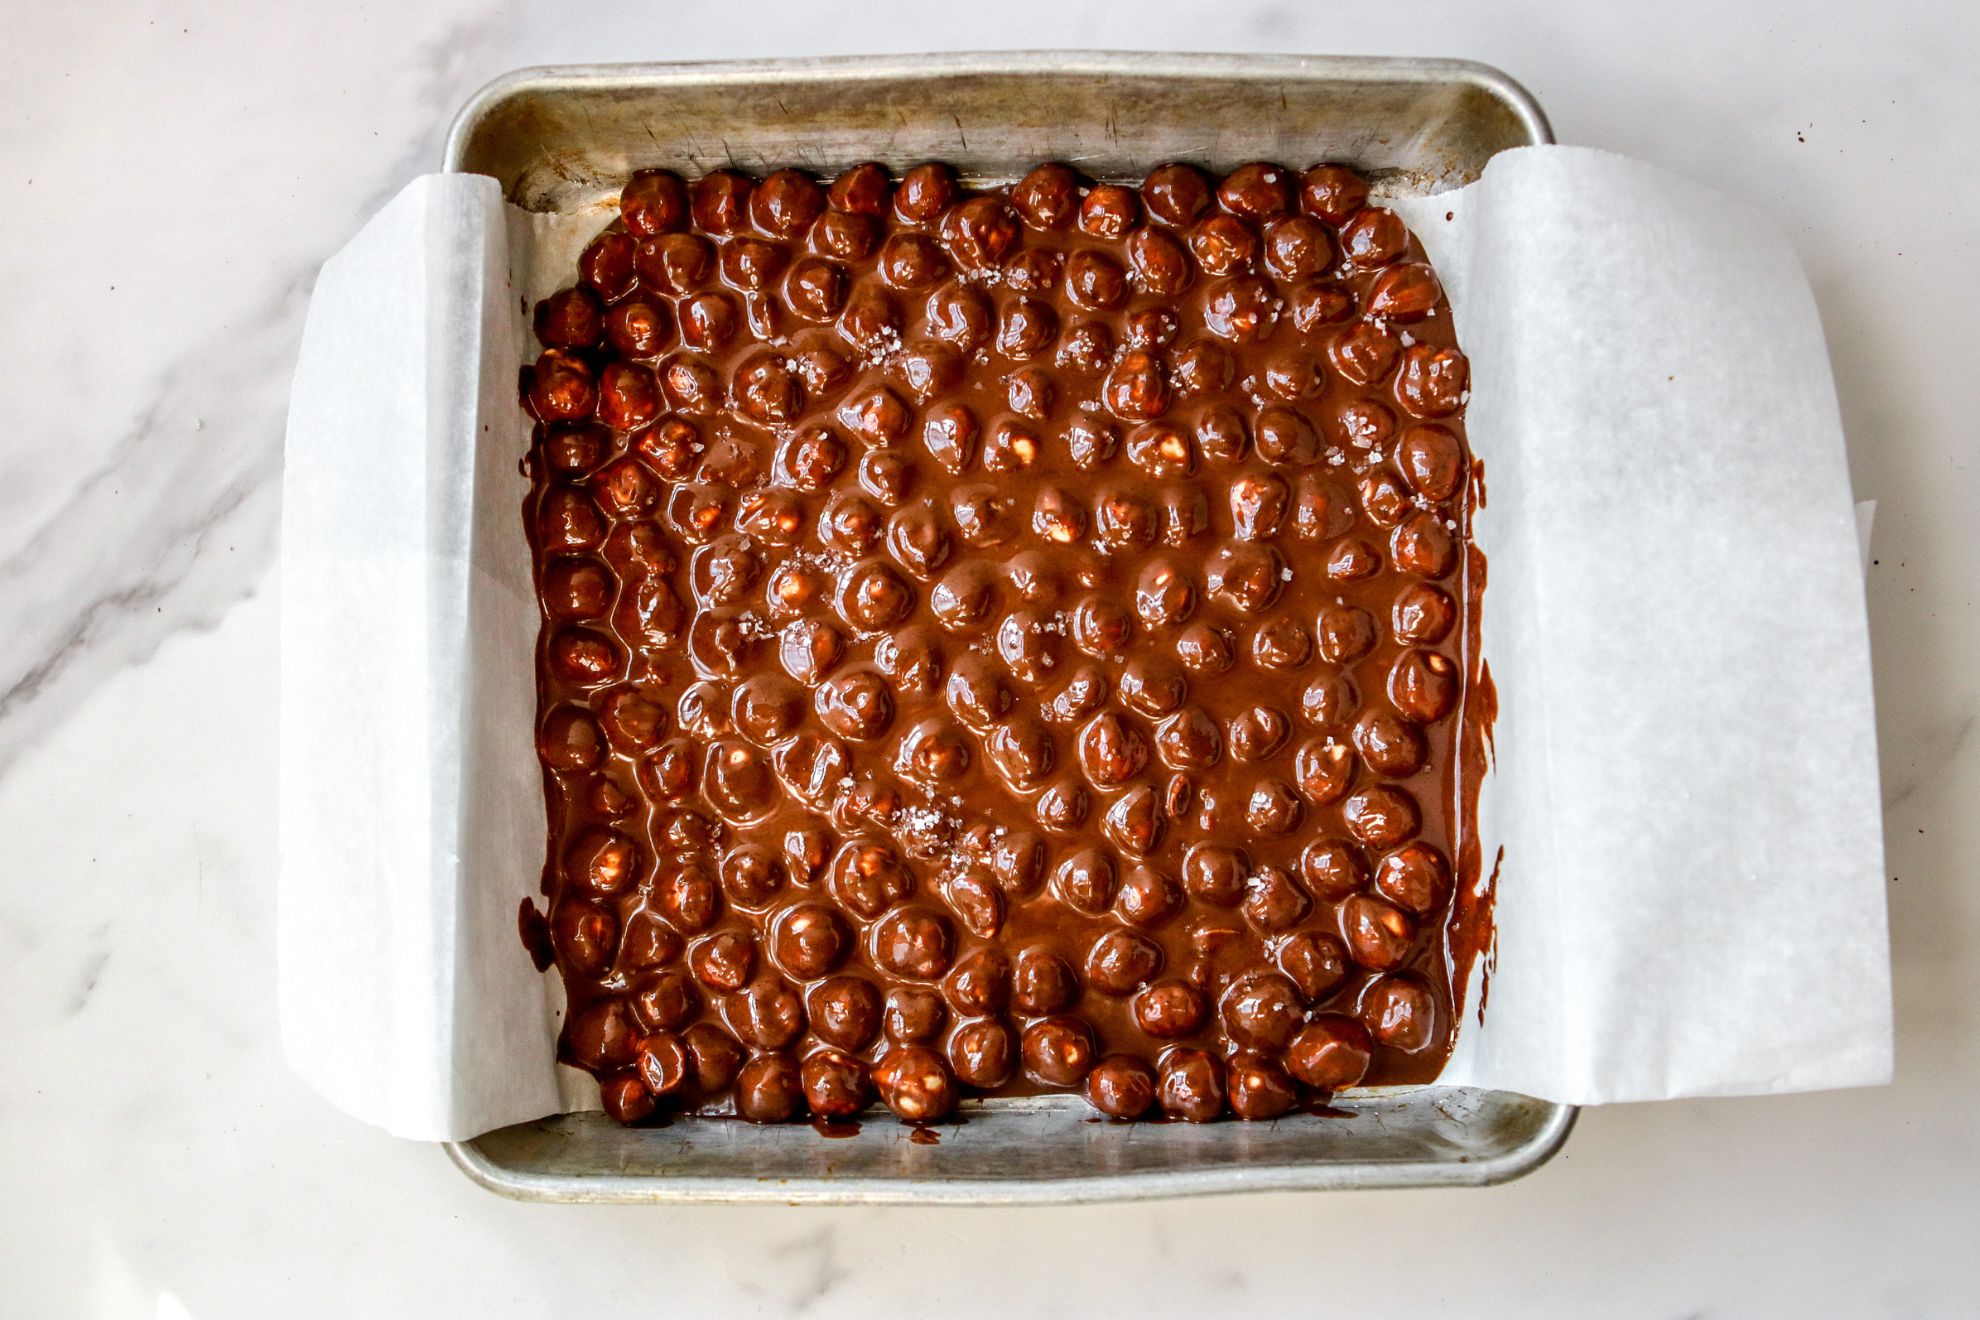 This is an overhead horizontal image of a square pan lined with white parchment paper. In the pan, on top of the parchment paper is a layer of hazelnuts coated in chocolate across the bottom of the pan. The pan sits on a white marble counter.